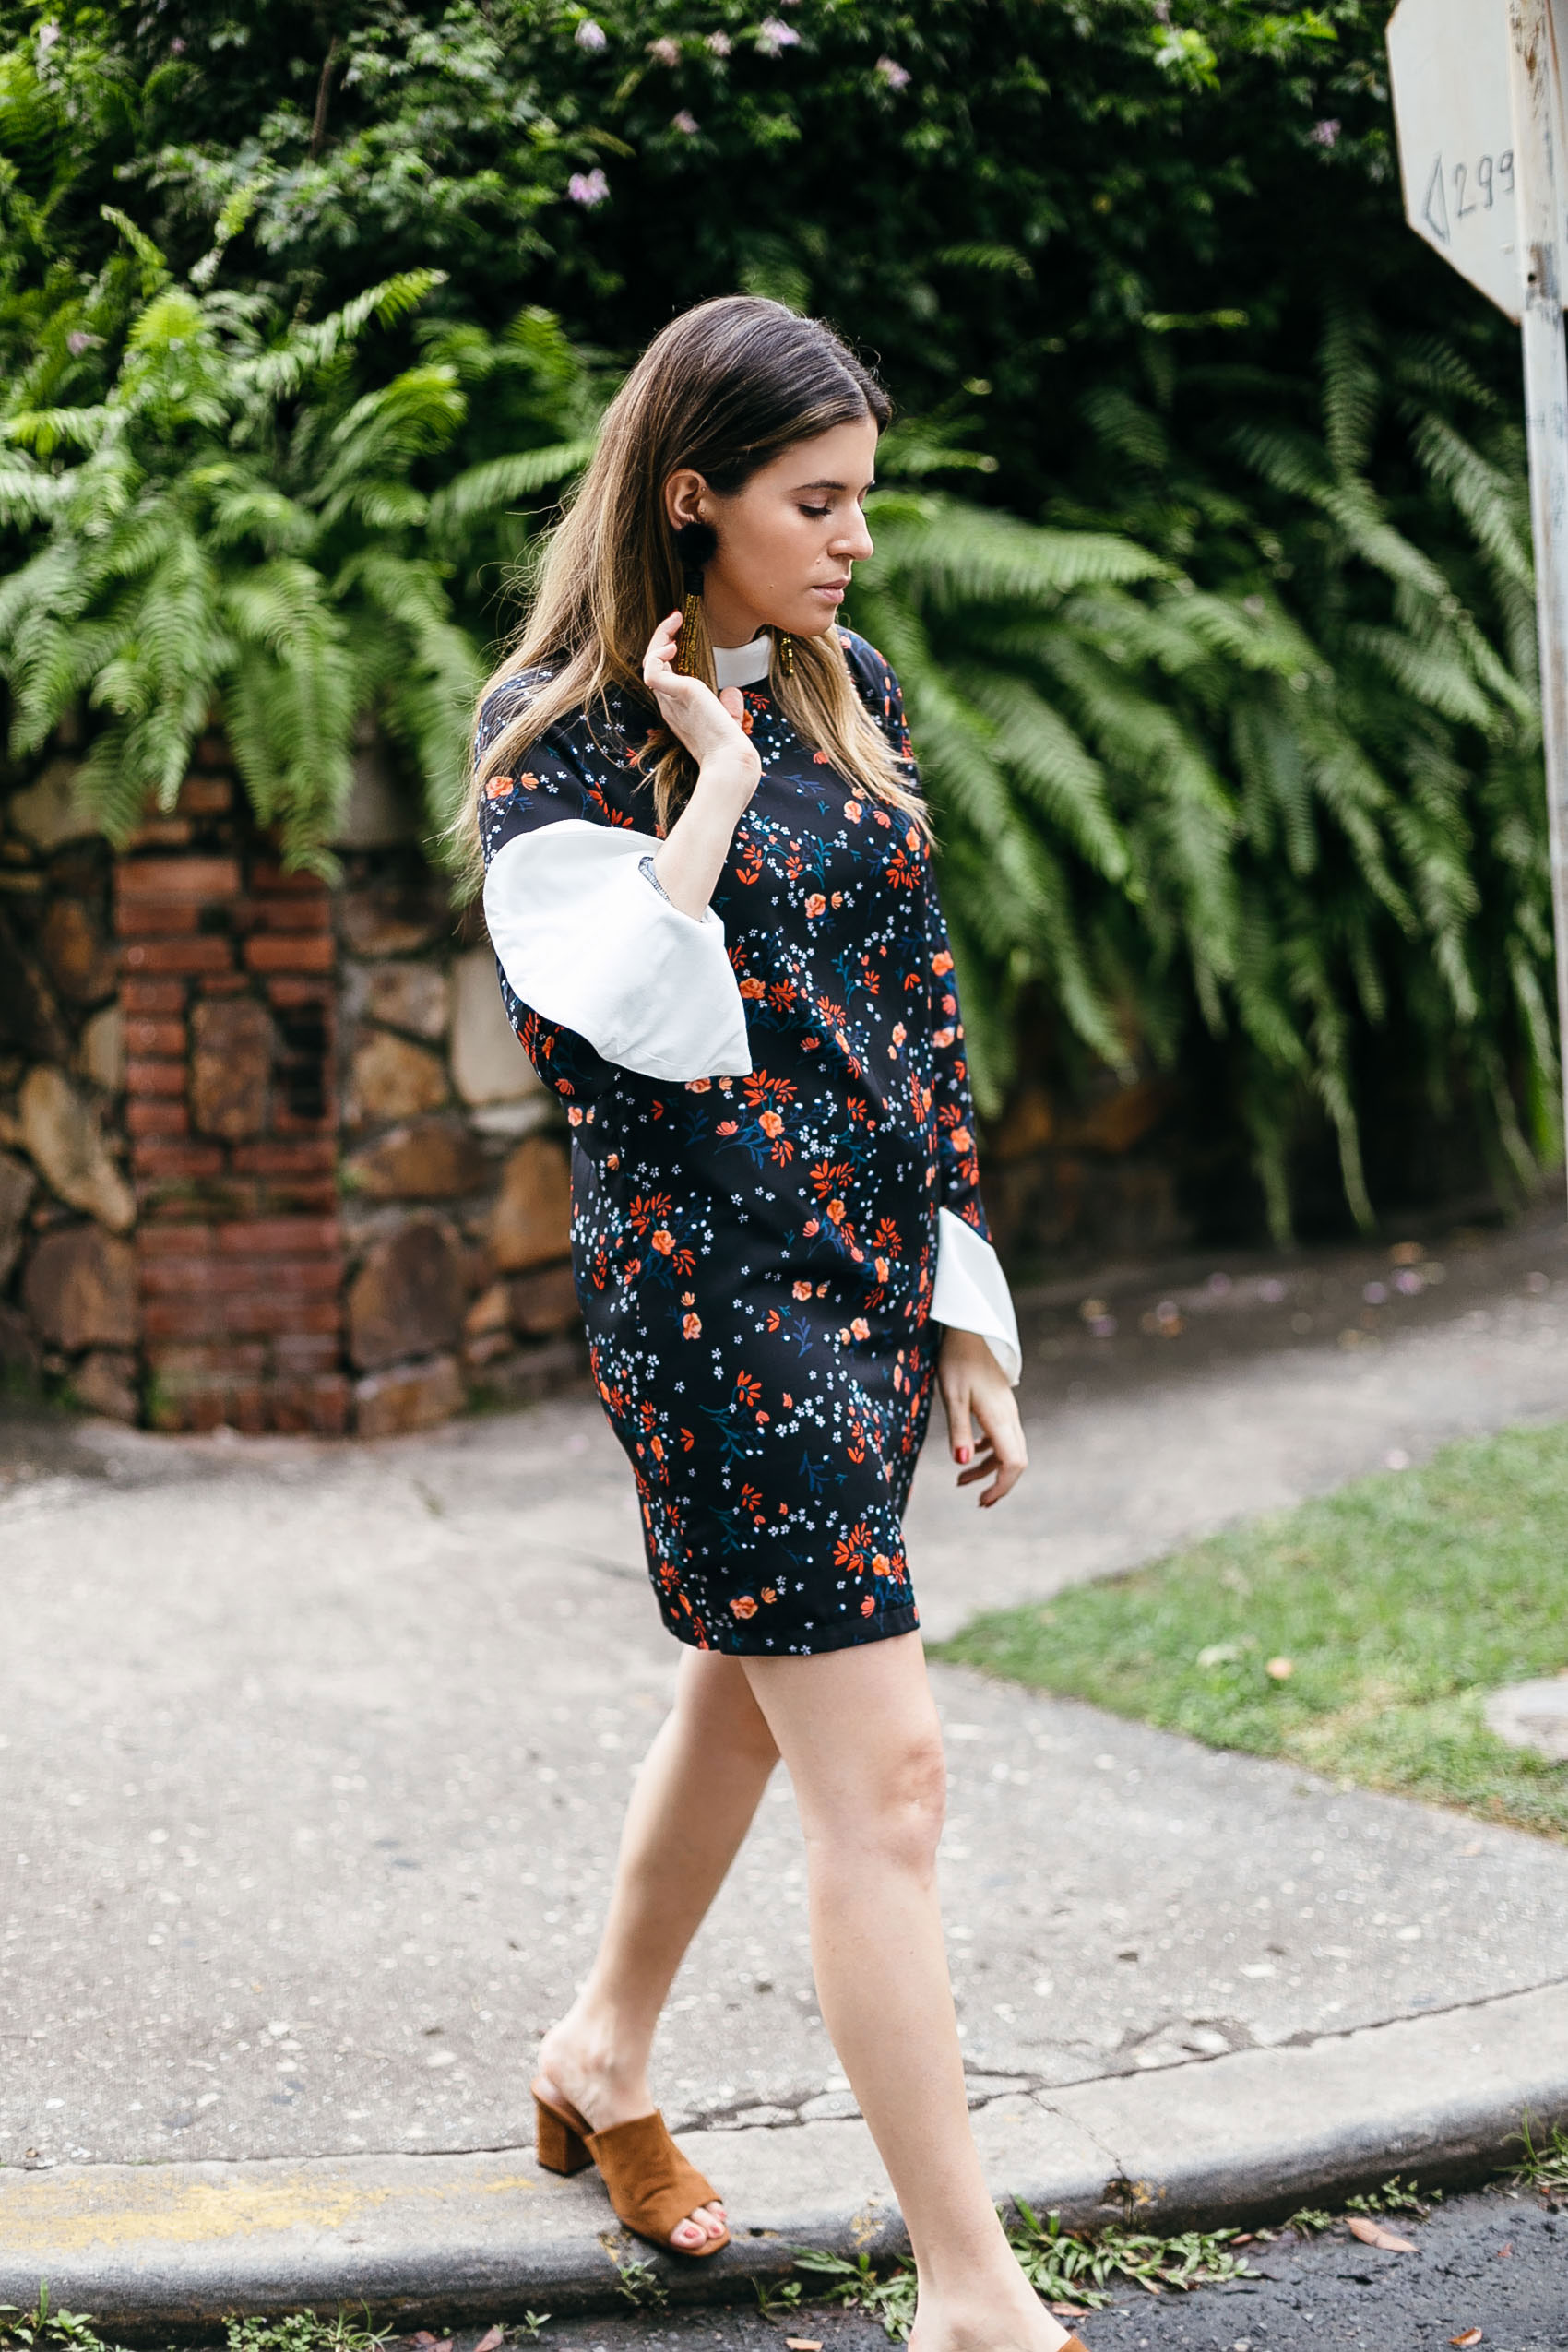 Maristella wearing a floral tunic dress with contrast flared sleeves, mules and tassel earrings